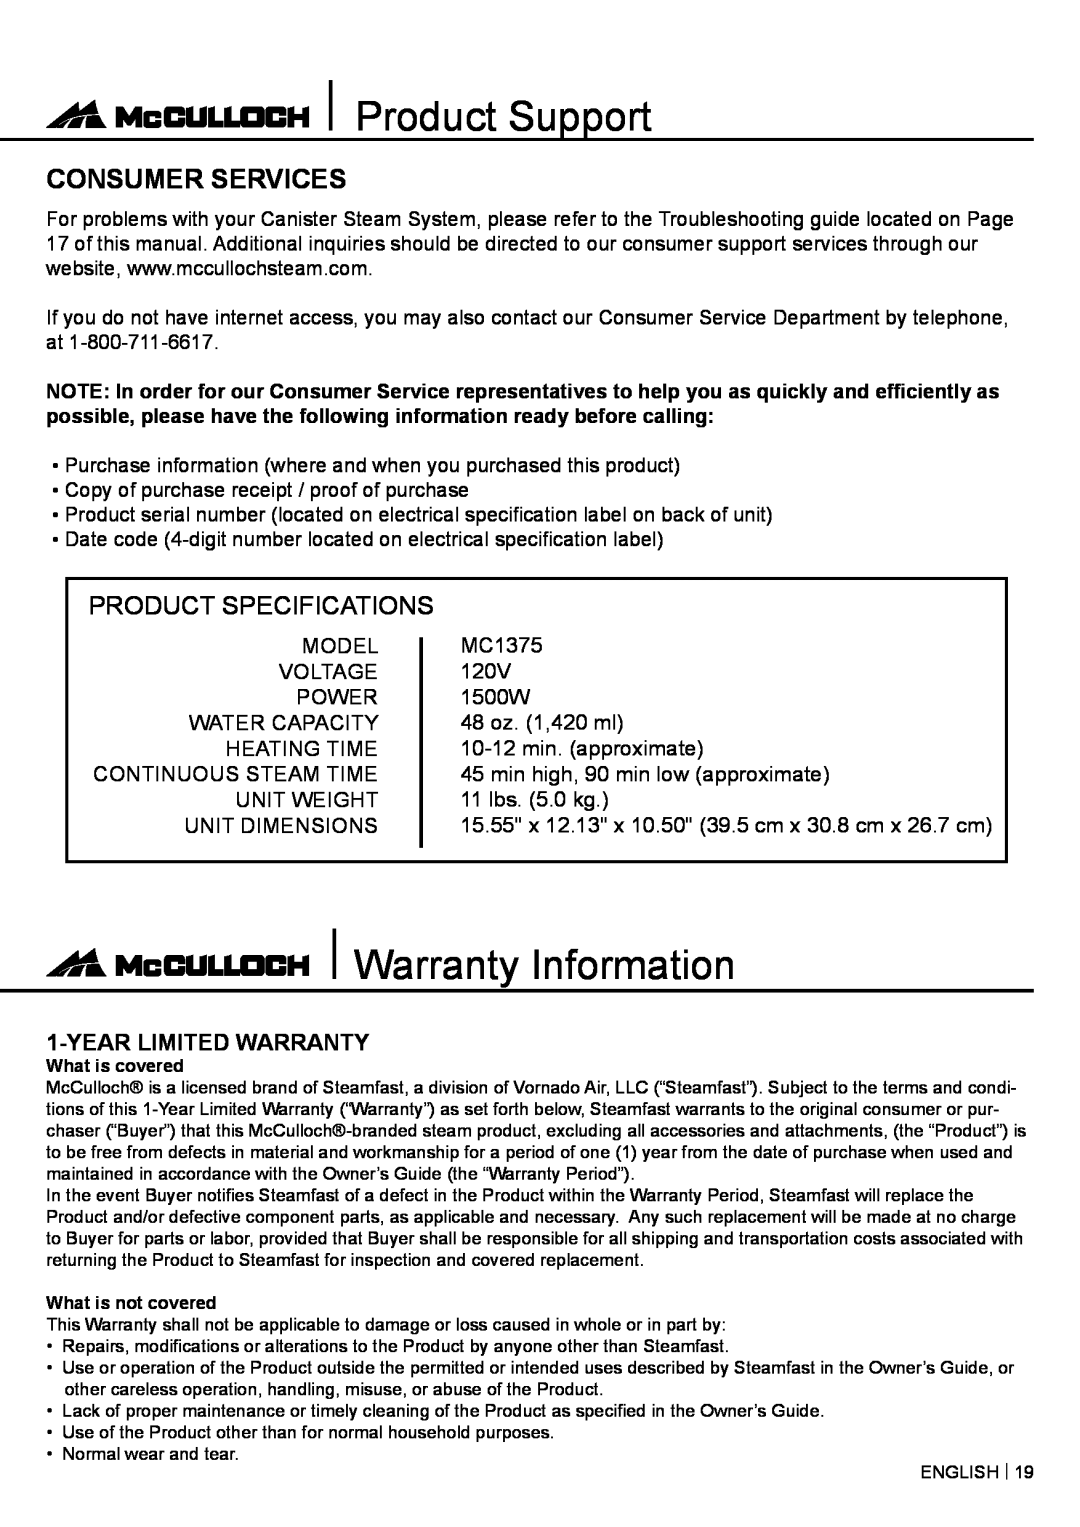 McCulloch MC1375 warranty Product Support, Warranty Information, Consumer Services, Product Specifications 